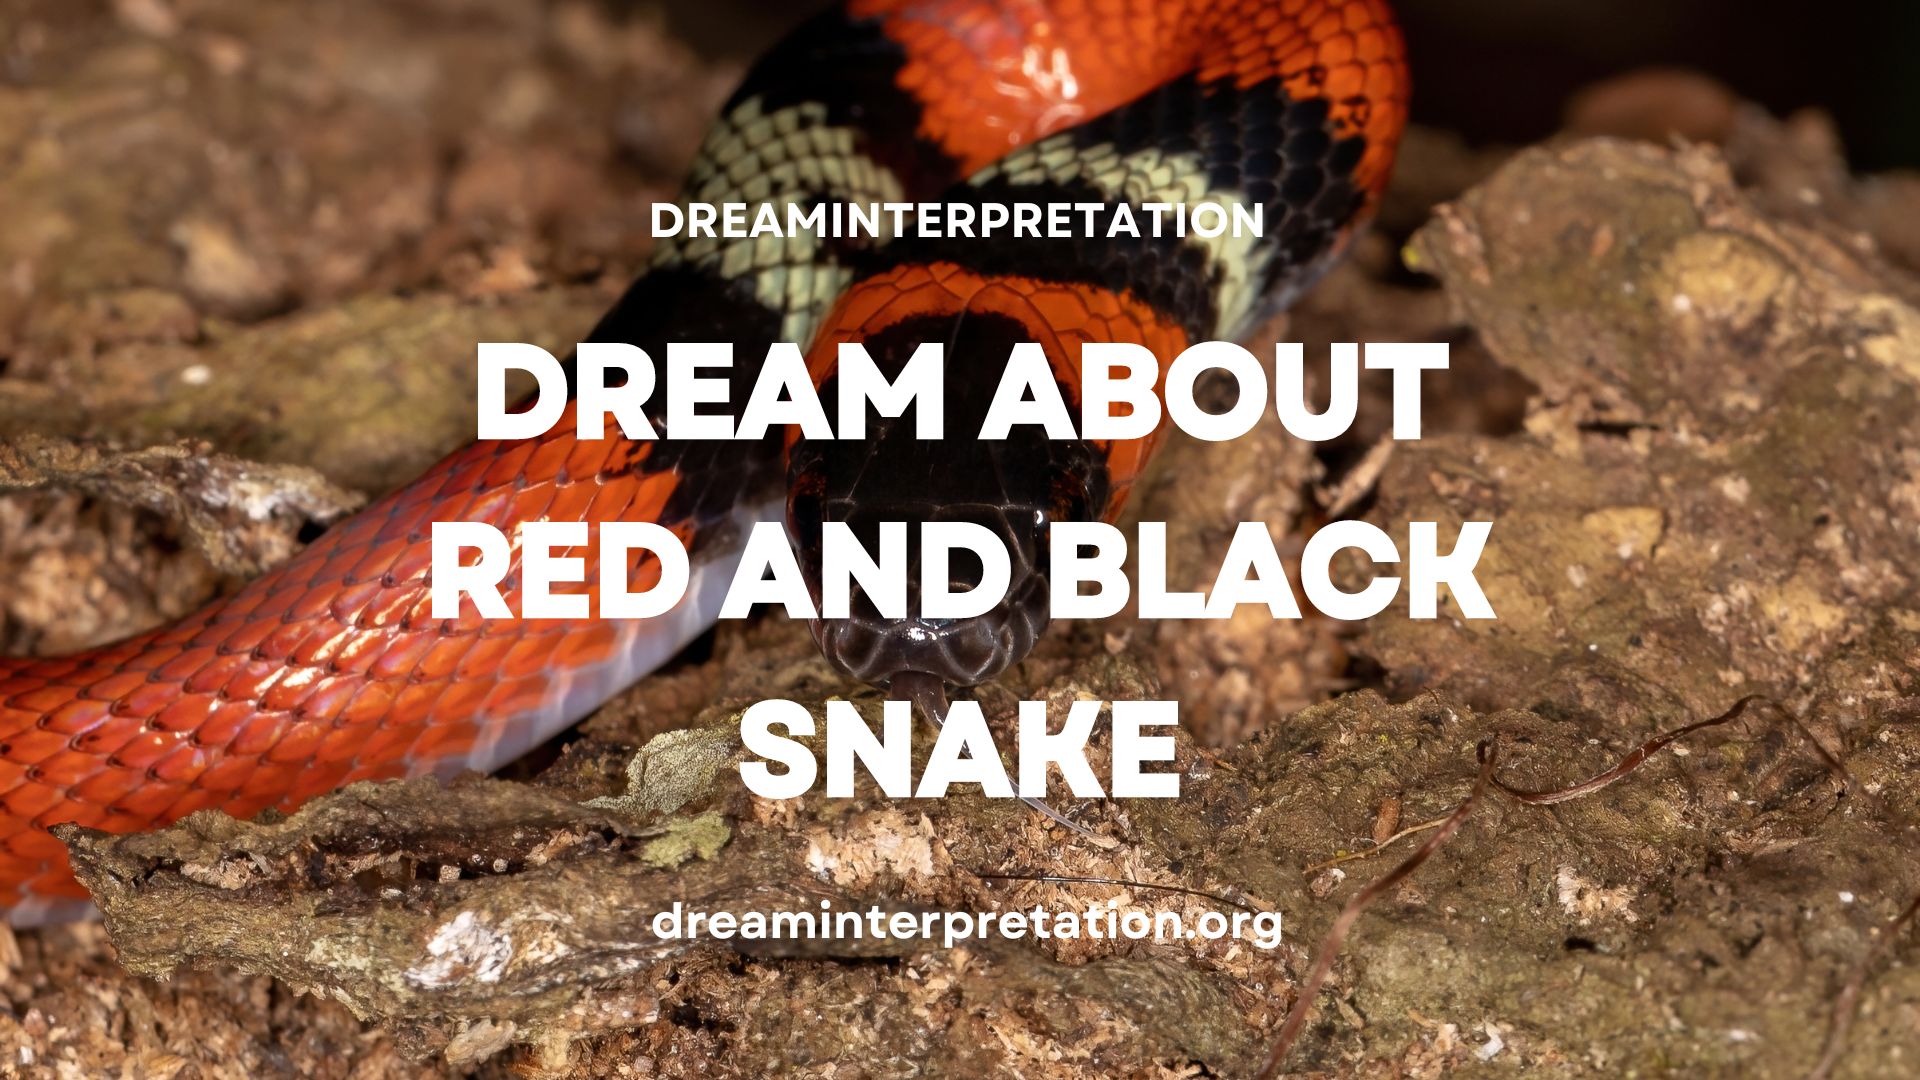 Dream About Red and Black Snake